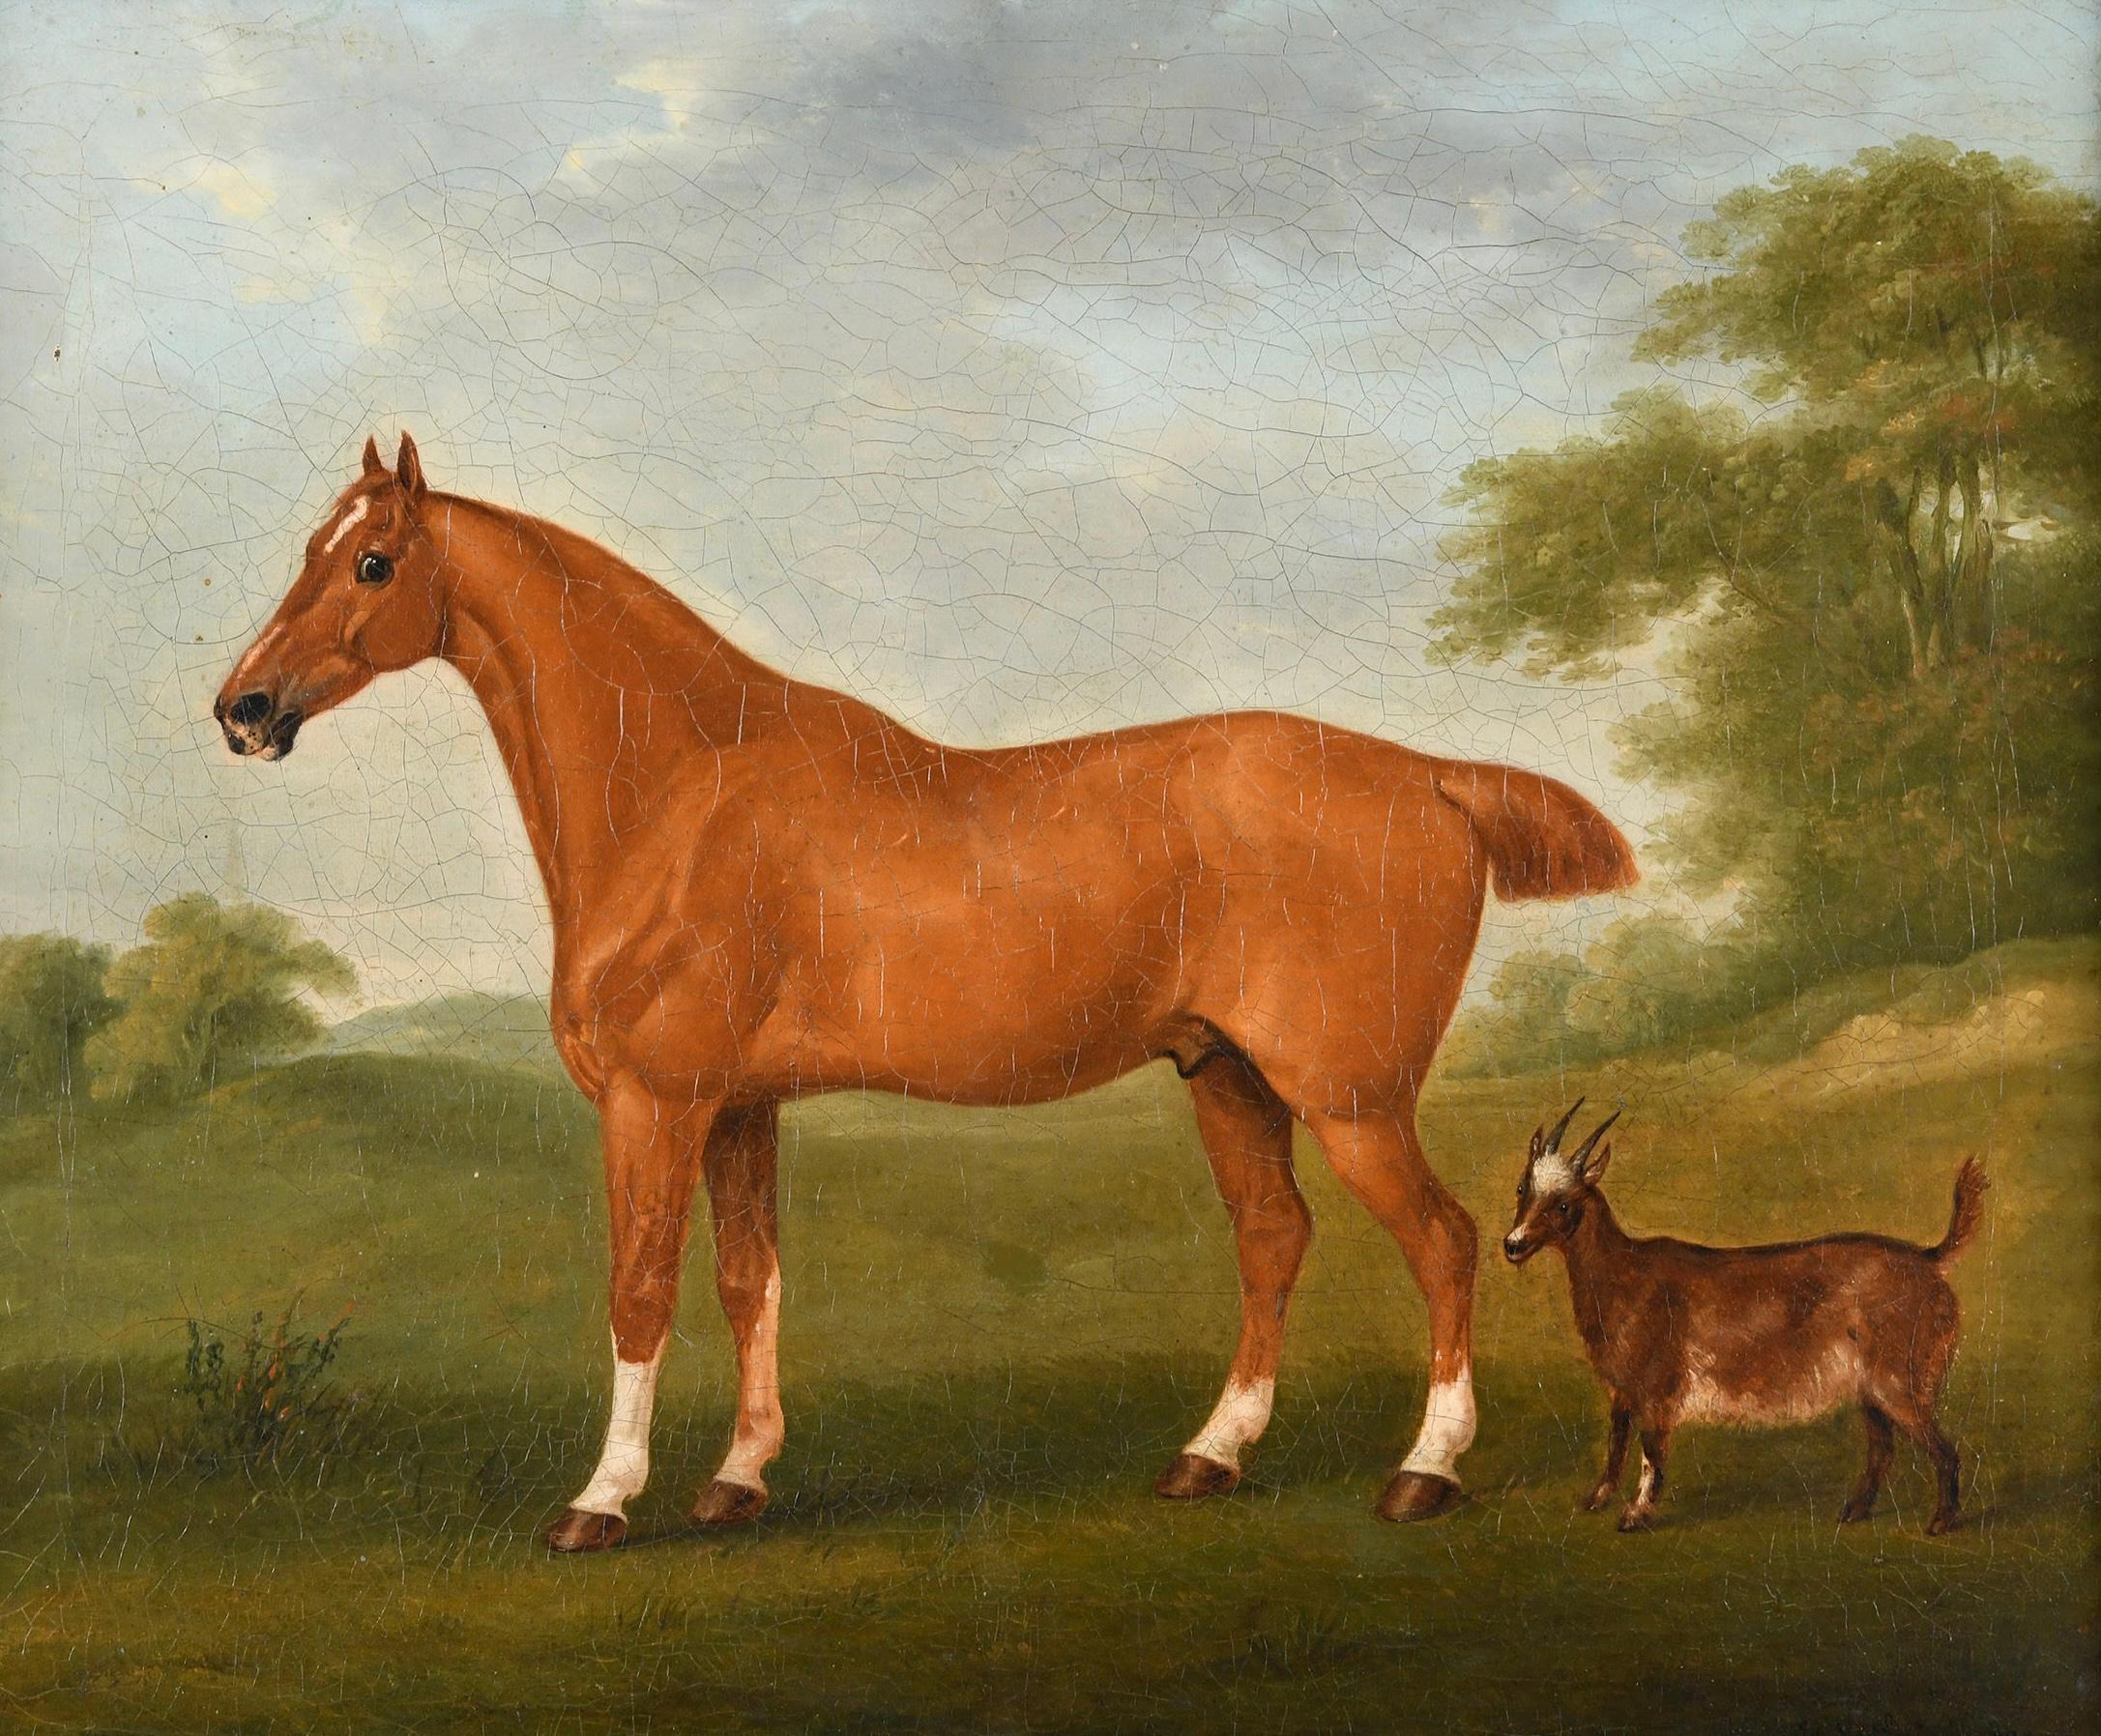 A chestnut horse and a goat in a landscape  - Painting by John Nost Sartorius